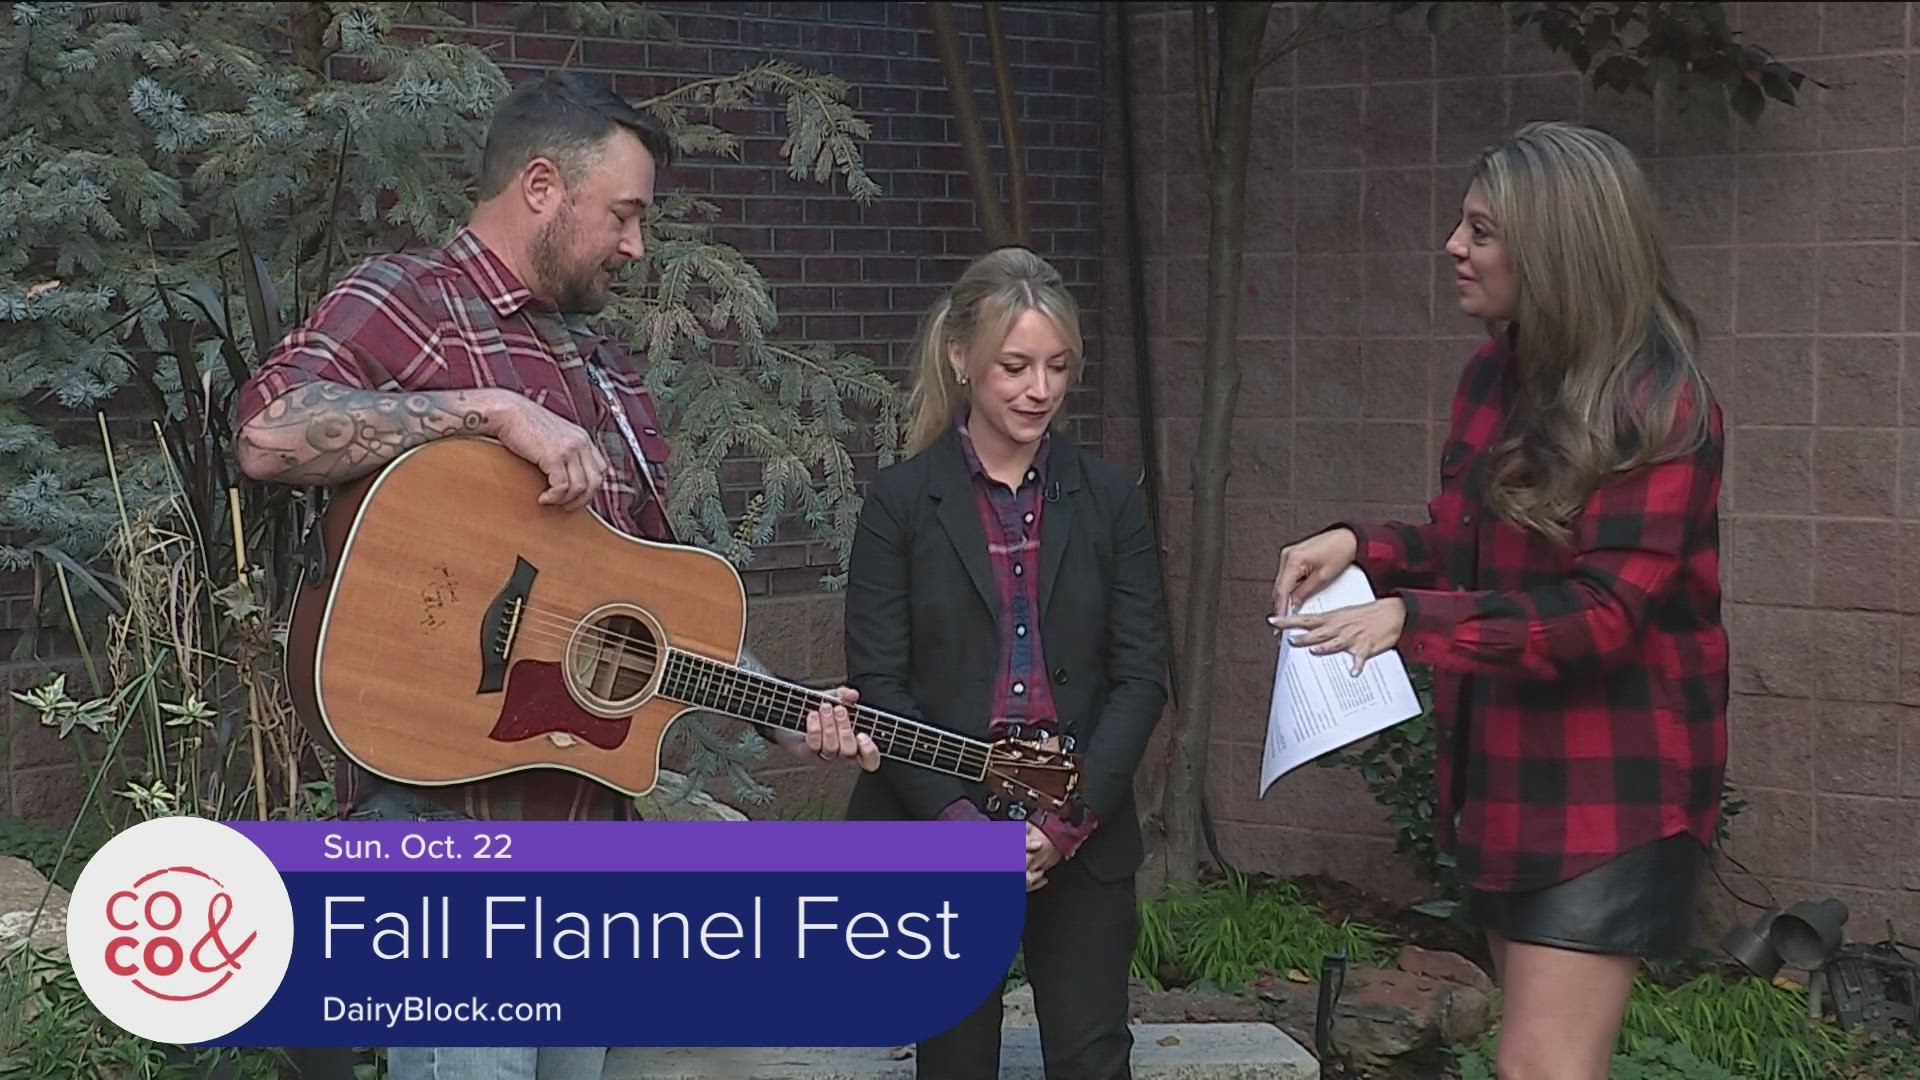 The Fall Flannel Festival is Sunday, Oct. 22 from 11-2. It's free to attend this weekend at the Dairy Block. Check out DairyBlock.com for more information.